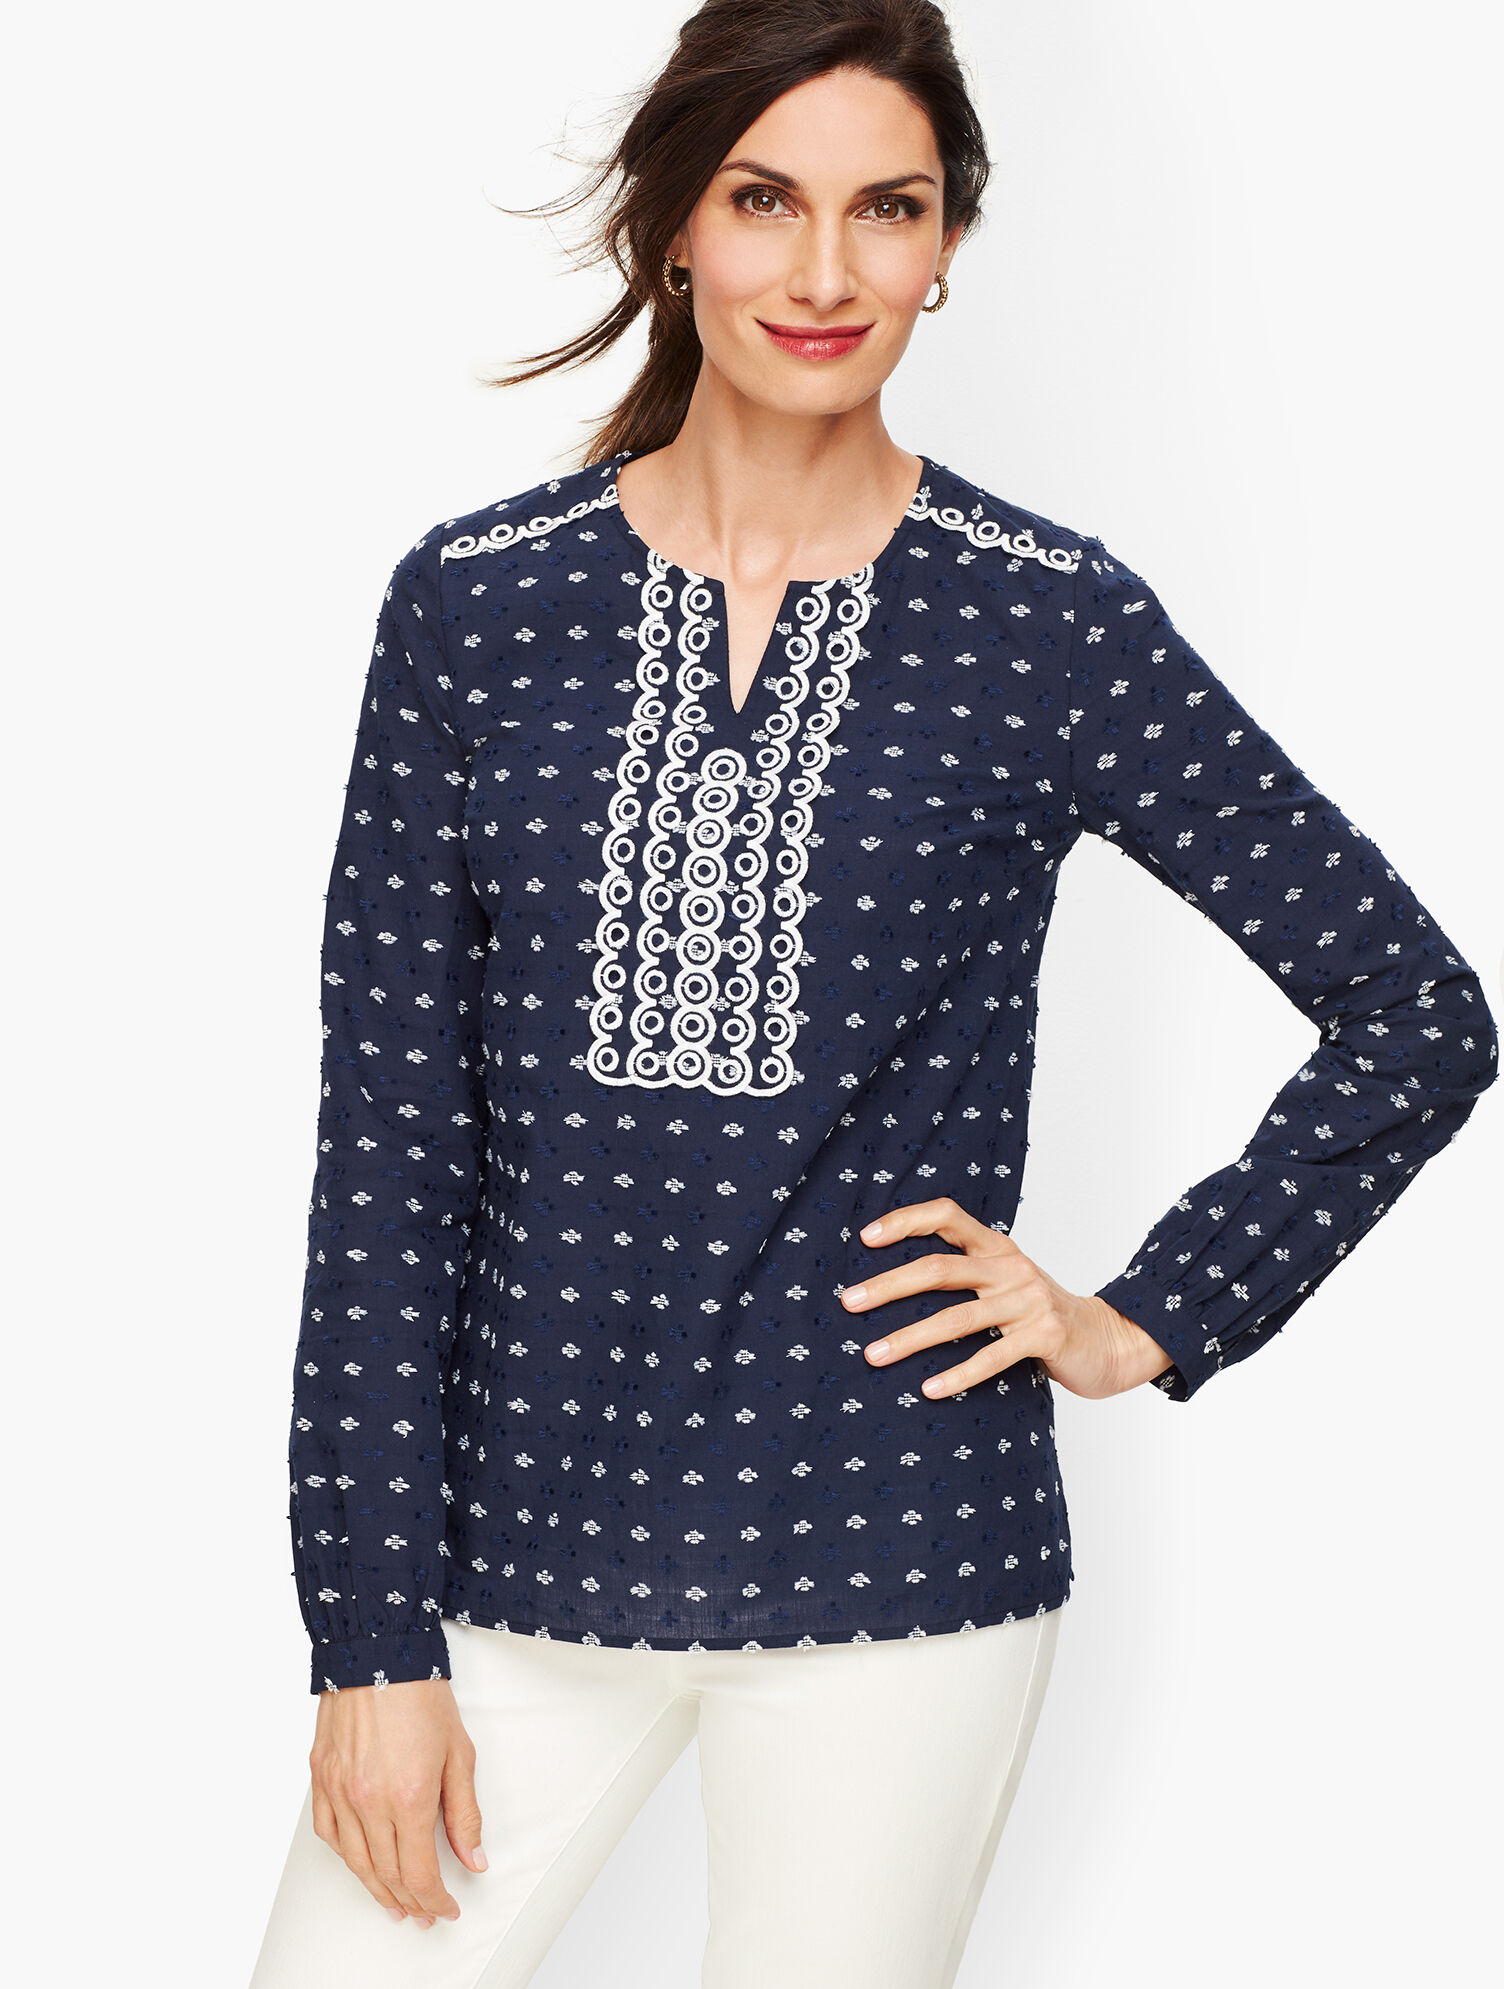 Embroidered Clip Dot Popover | Talbots